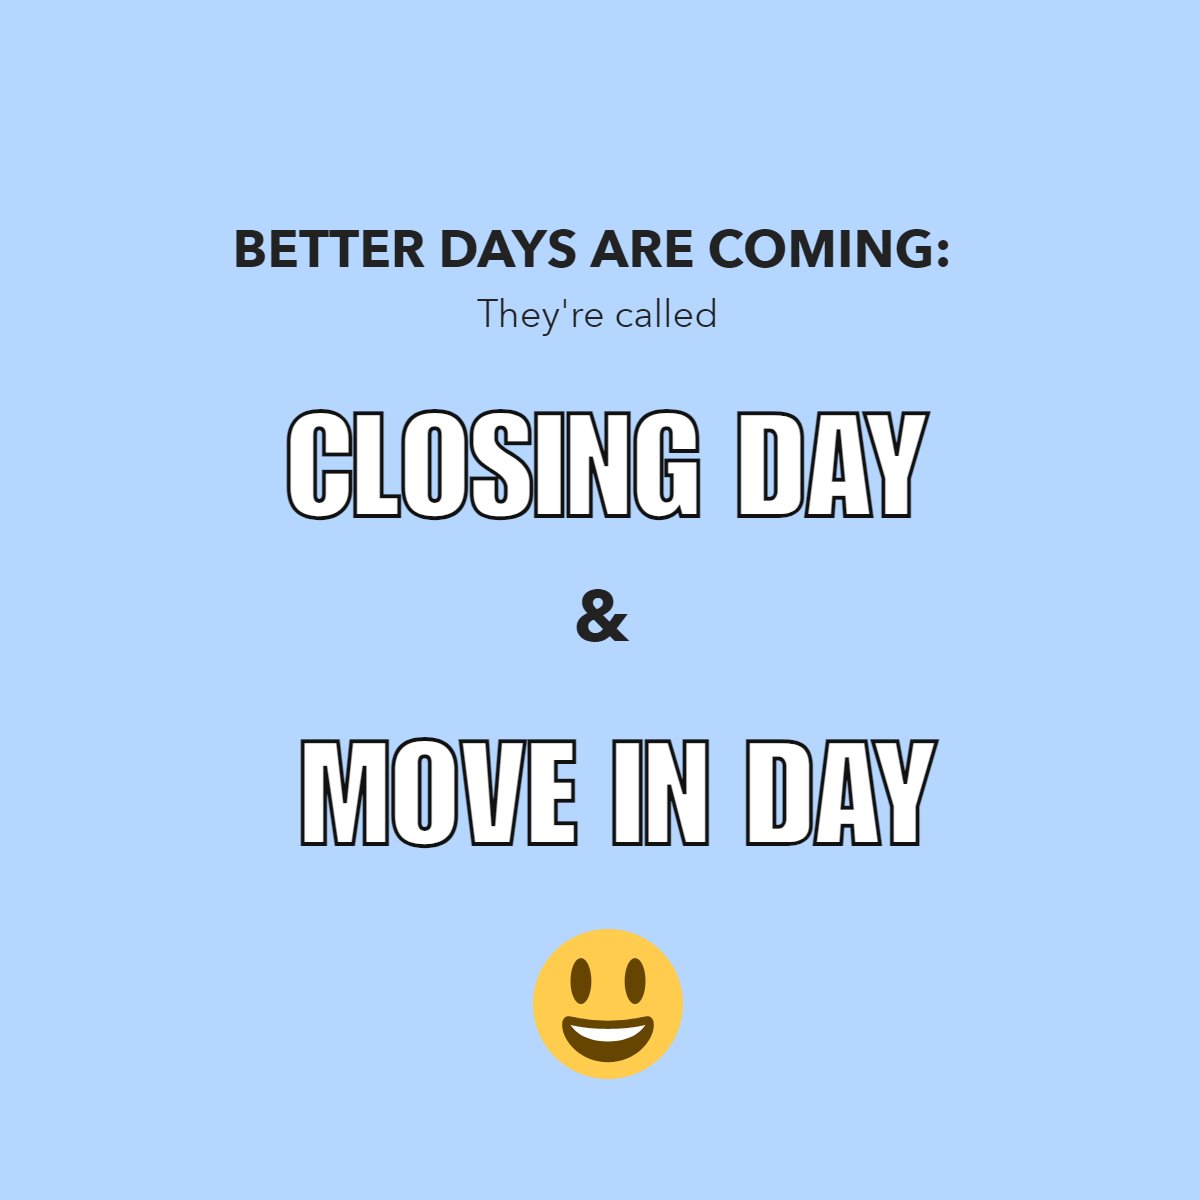 The happiest days... 🏠 🗝️

#realestate #realestatelife #moveday #dayclose #estaterealtor #realestatecoach #betterdaysahead #betterdaysarecoming
 #washingtonrealestate #washingtonrealtor #swwashingtonrealestate #sellinghomes #buyinghomes #exprealtor